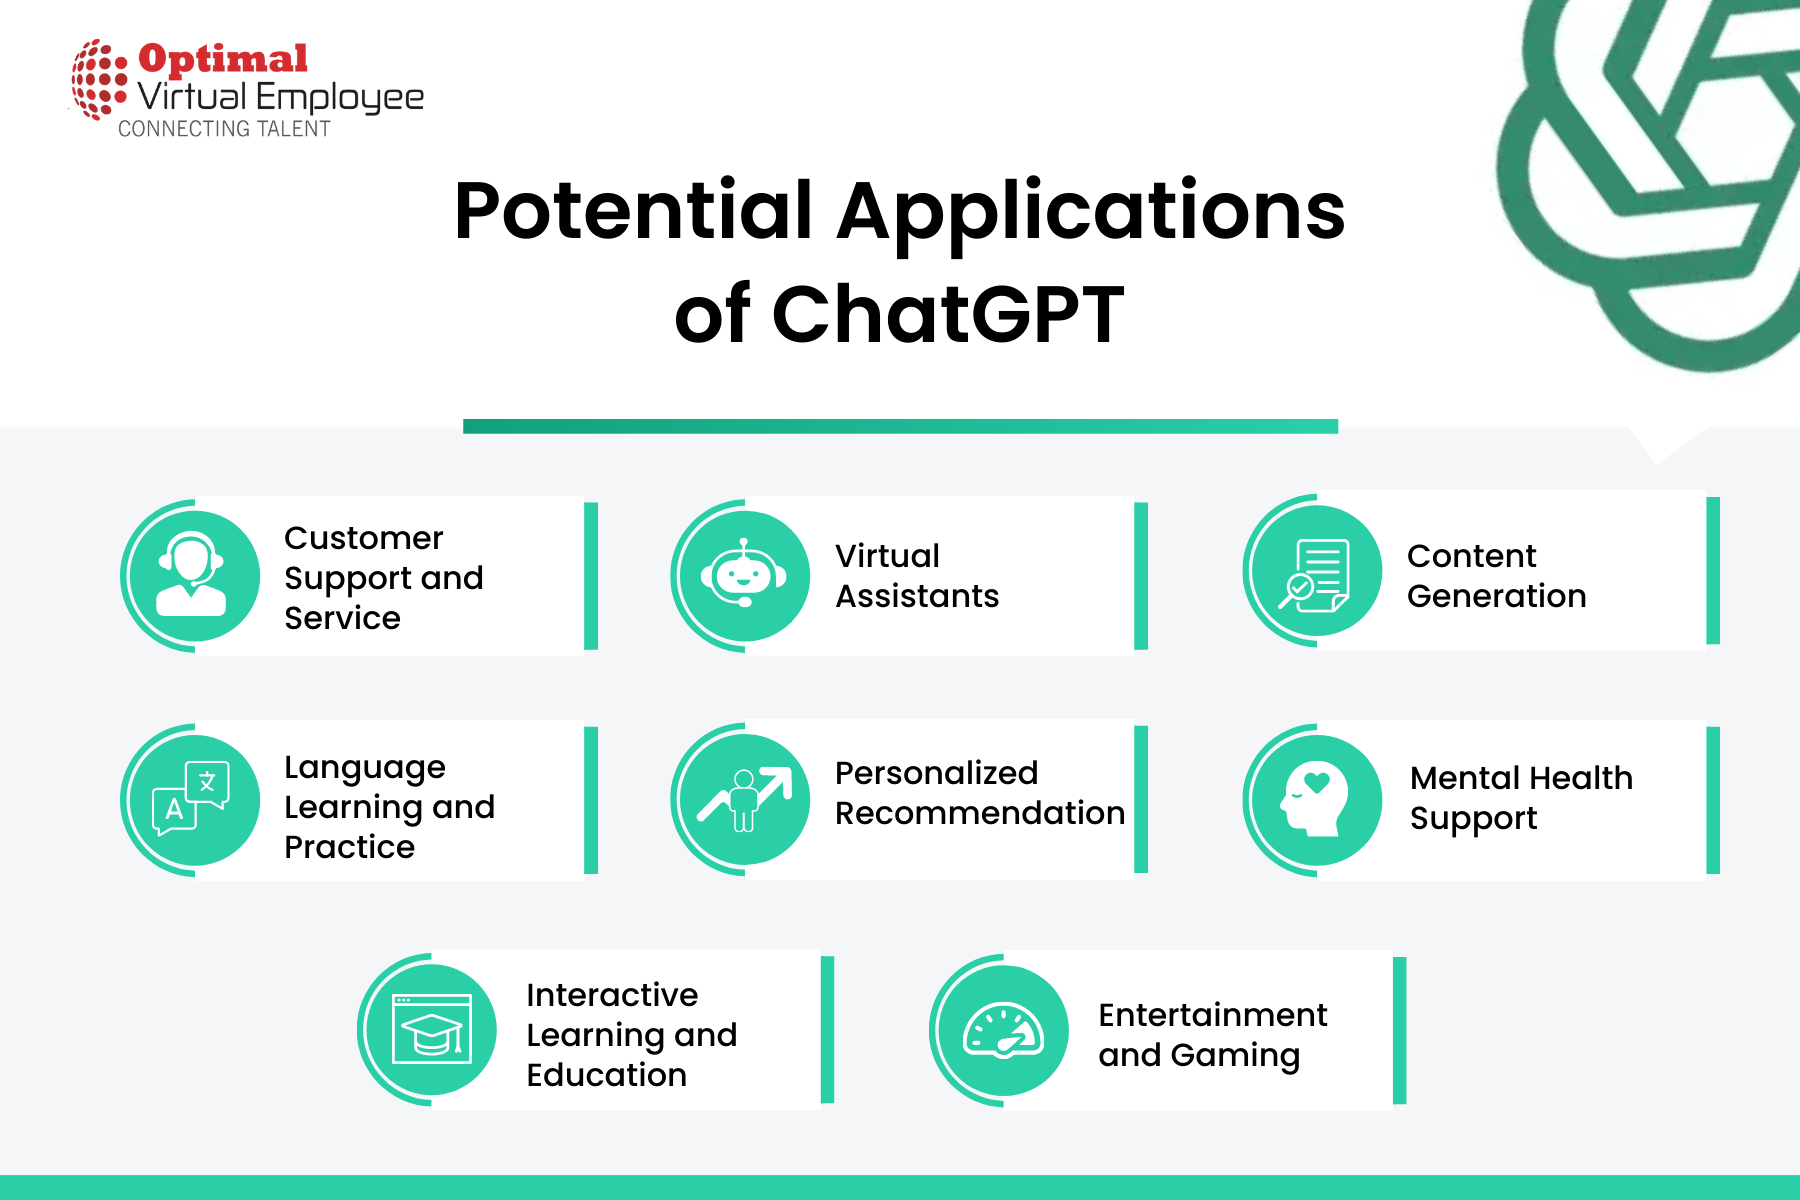 Potential Applications of ChatGPT